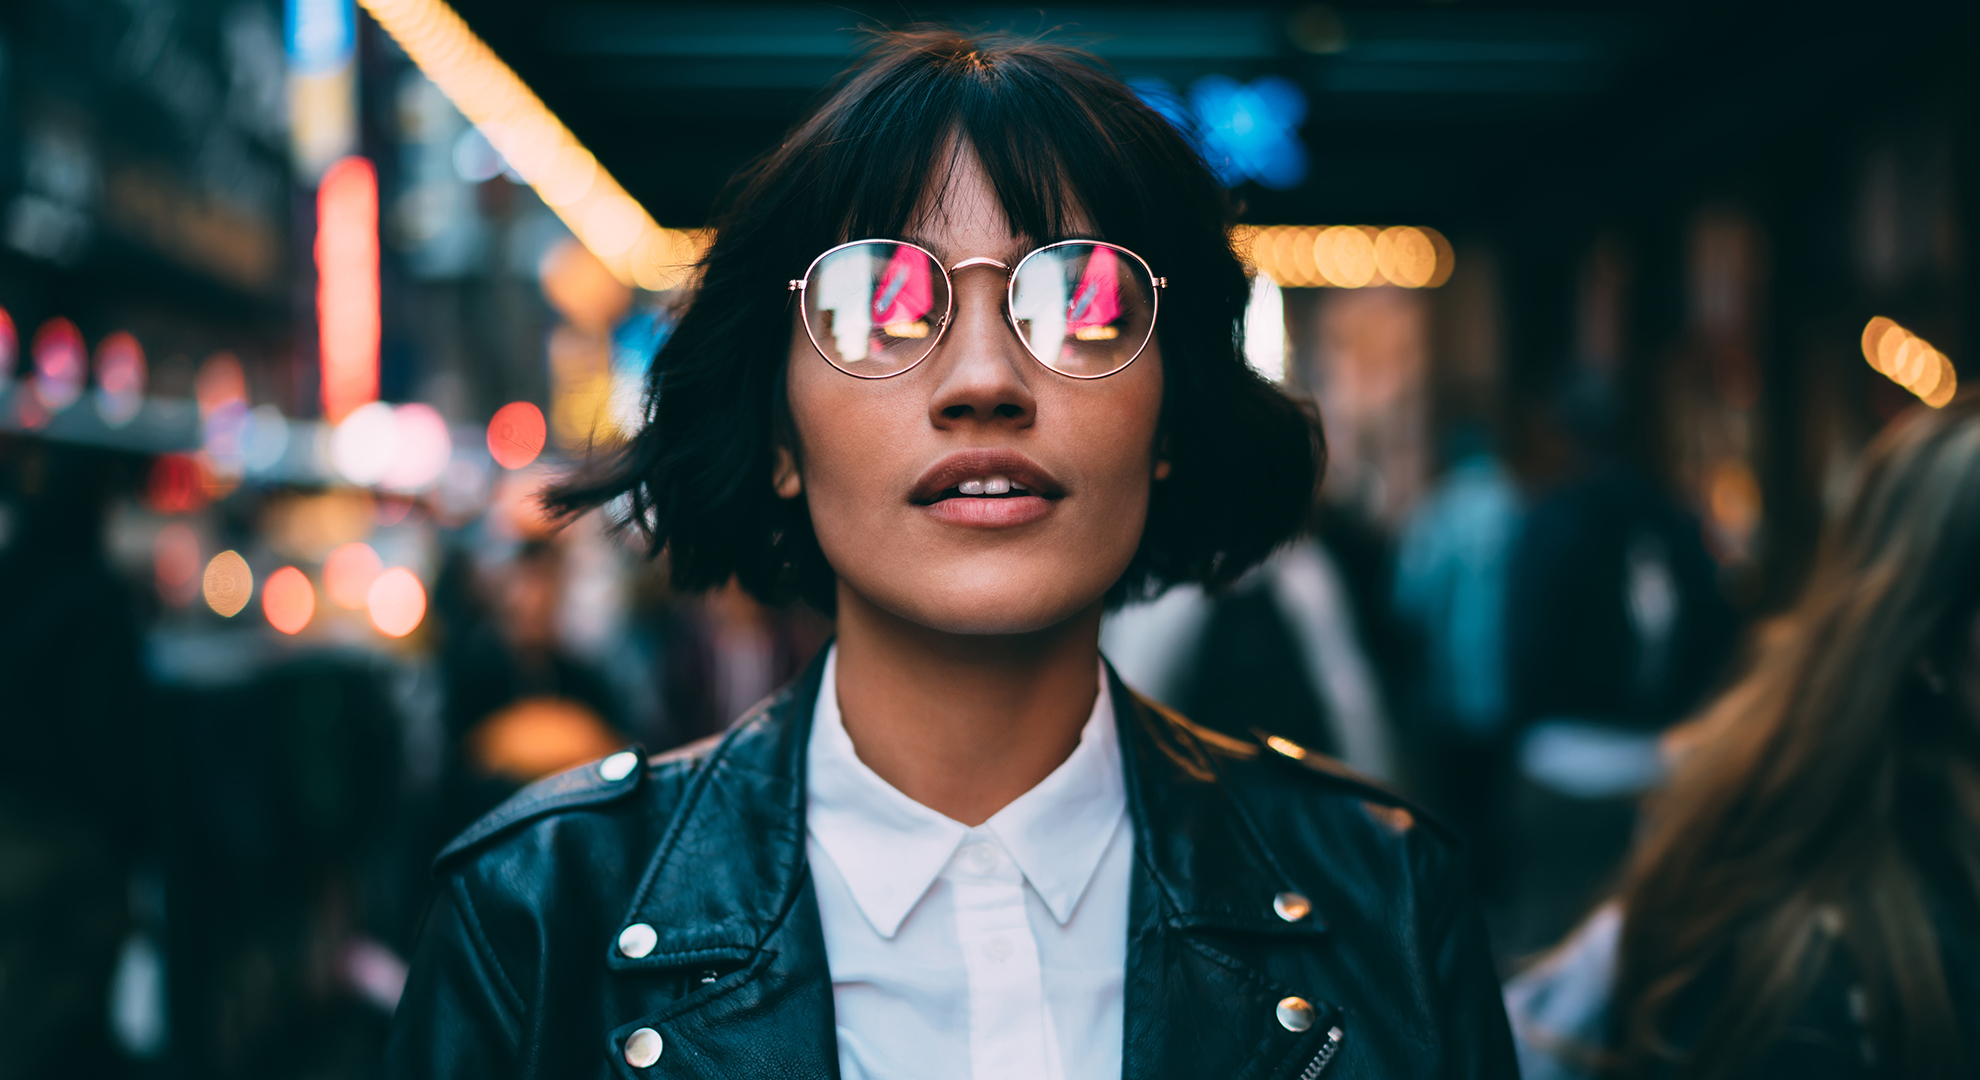 Person in optical spectacles with neon reflection